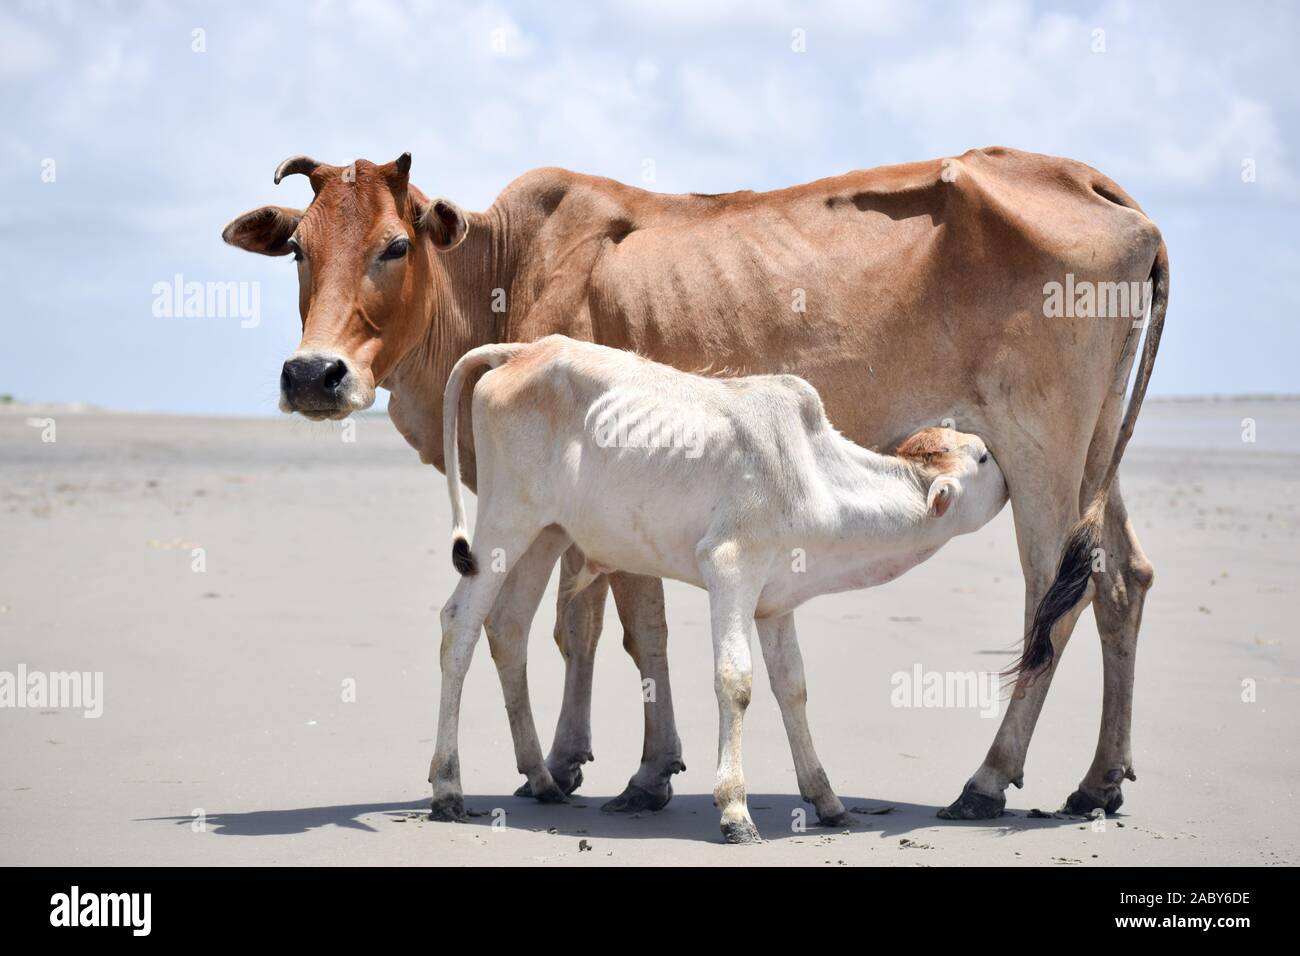 Cute Baby Calf Drinking Mothers Milk Indian Cow Feeding Milk To Her